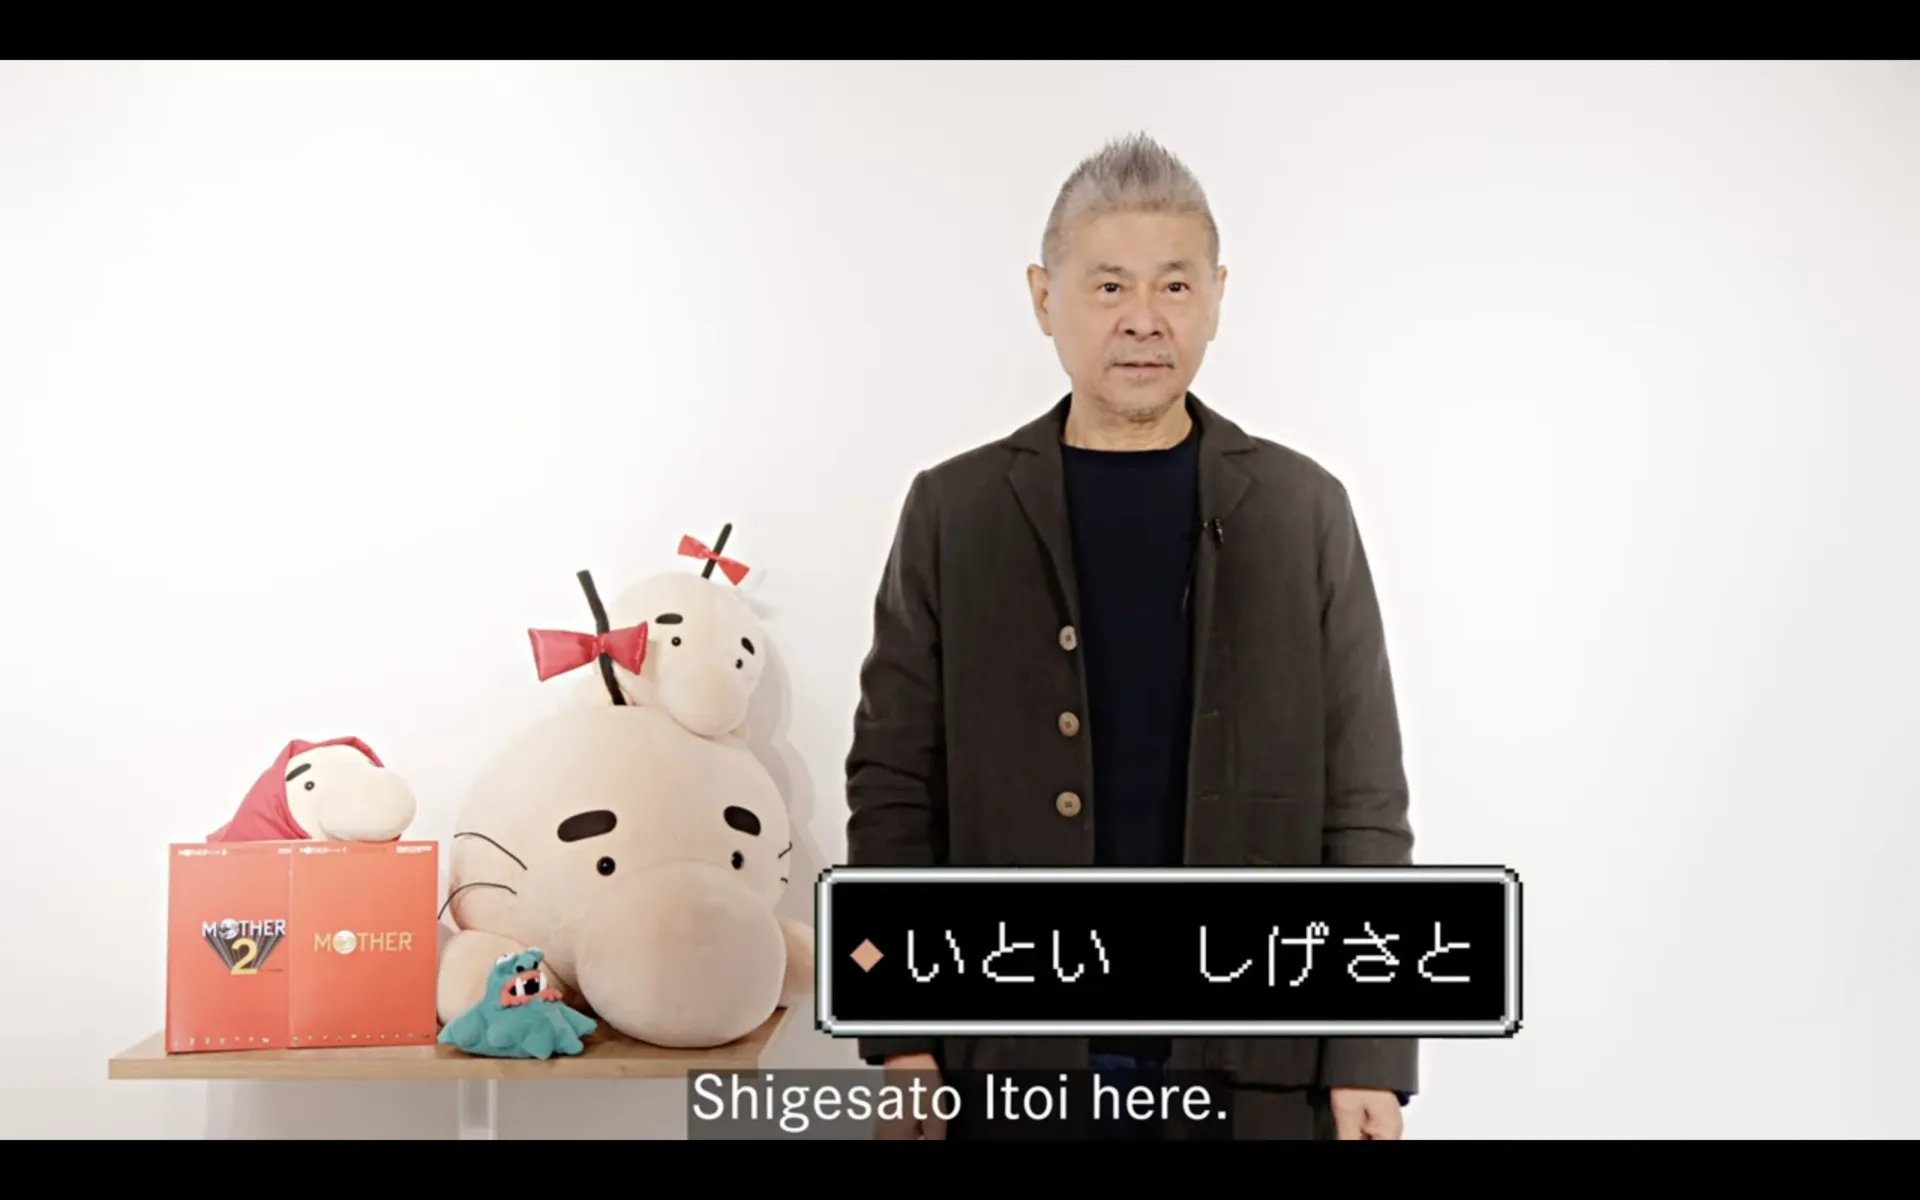 Mother Series Creator Shigesato Itoi Discusses Earthbound Switch Debuts